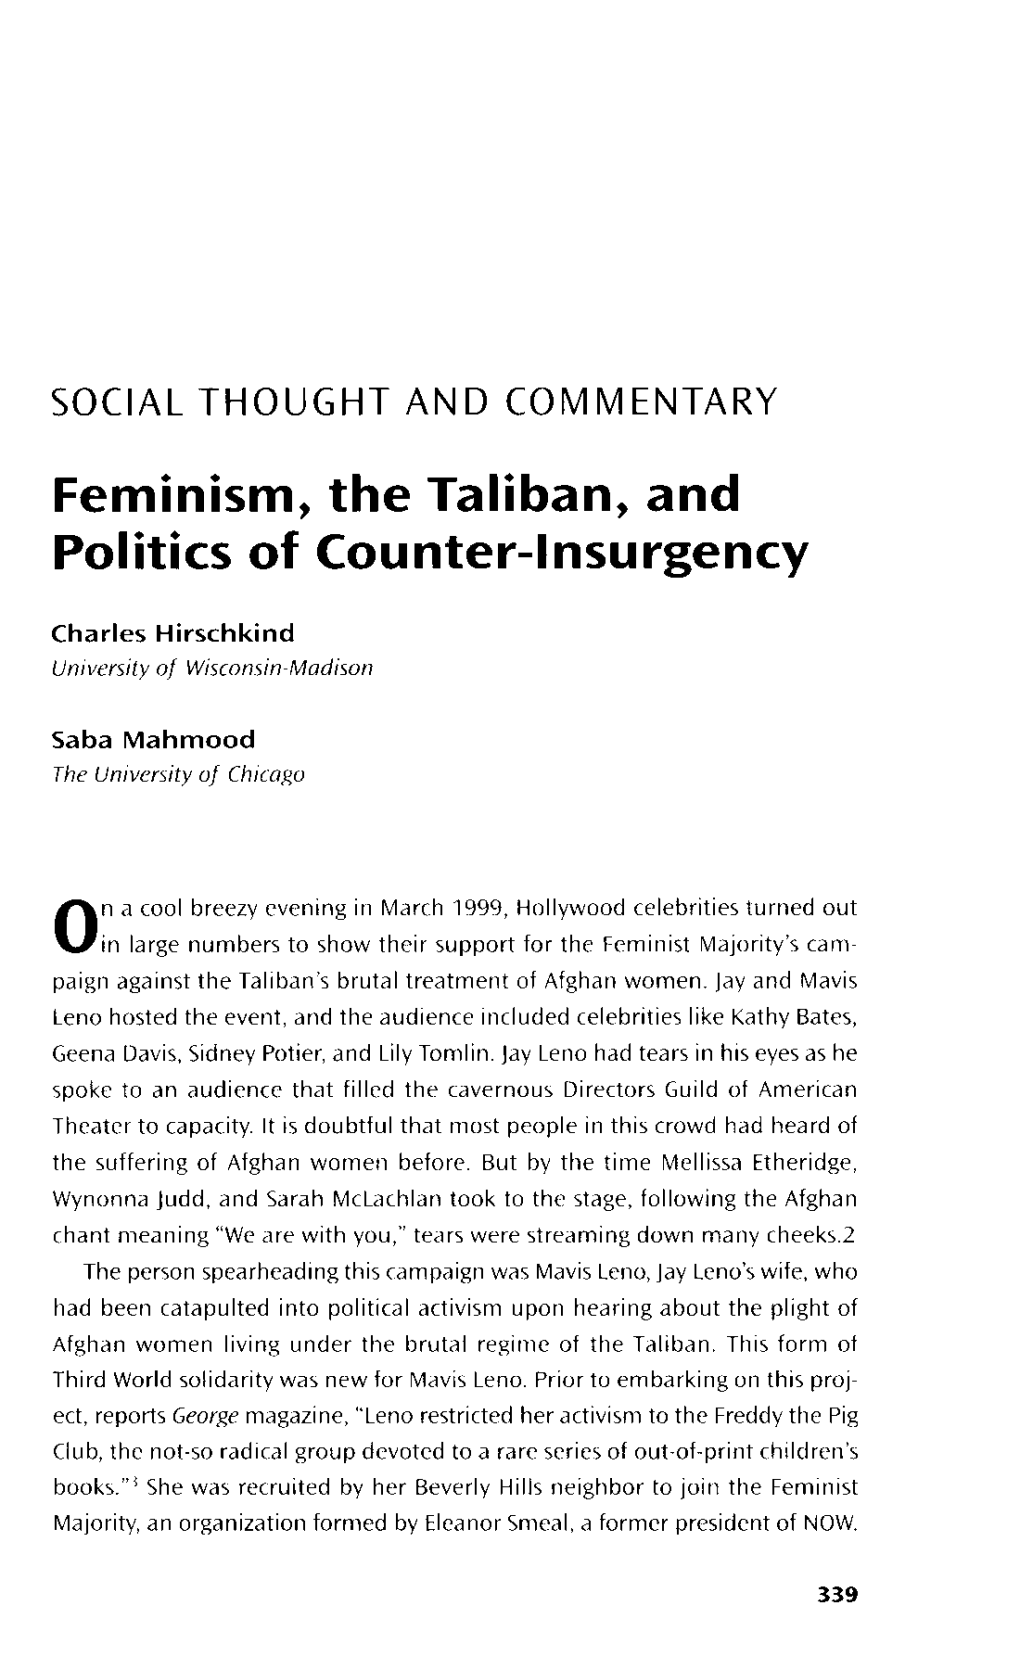 Feminism^ the Taliban^ and Politics of Counter-Insurgency